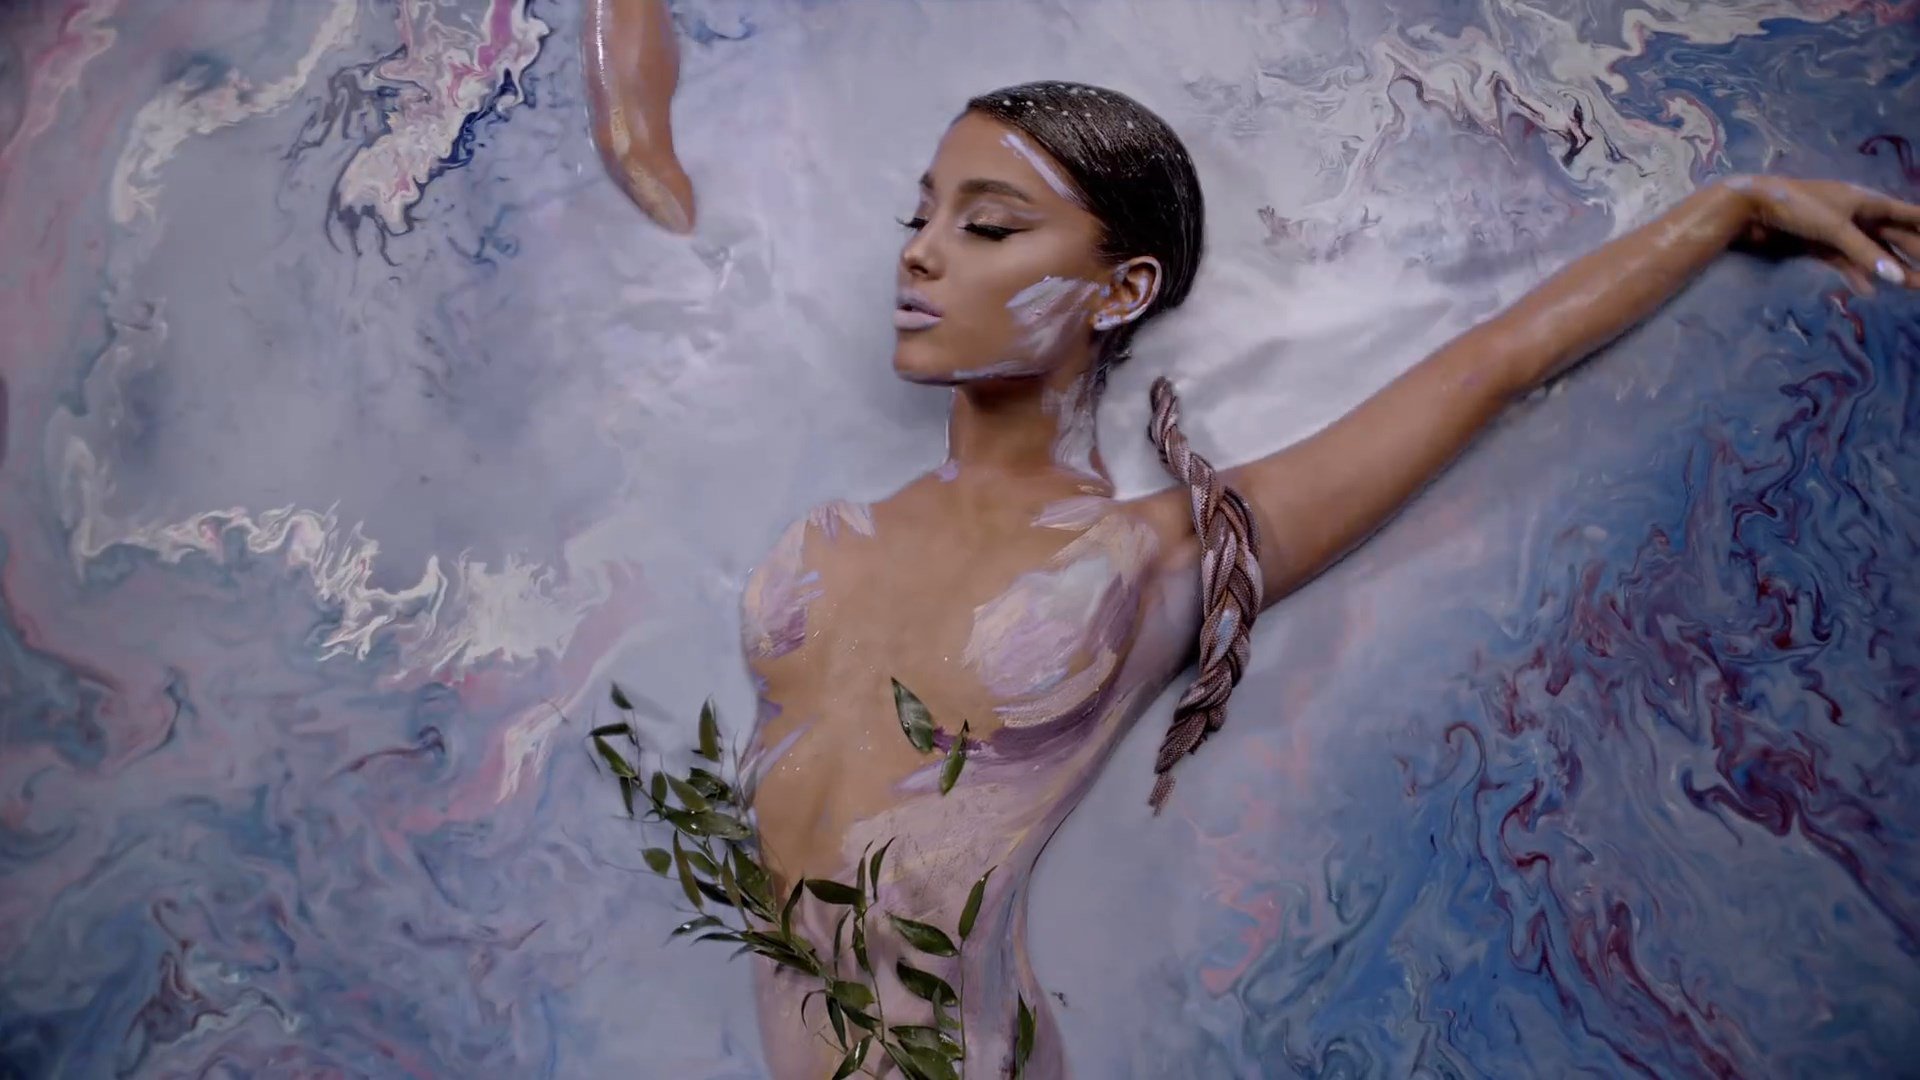 Ariana Grande - "God is a Woman" Music Video Cover & Caps. 